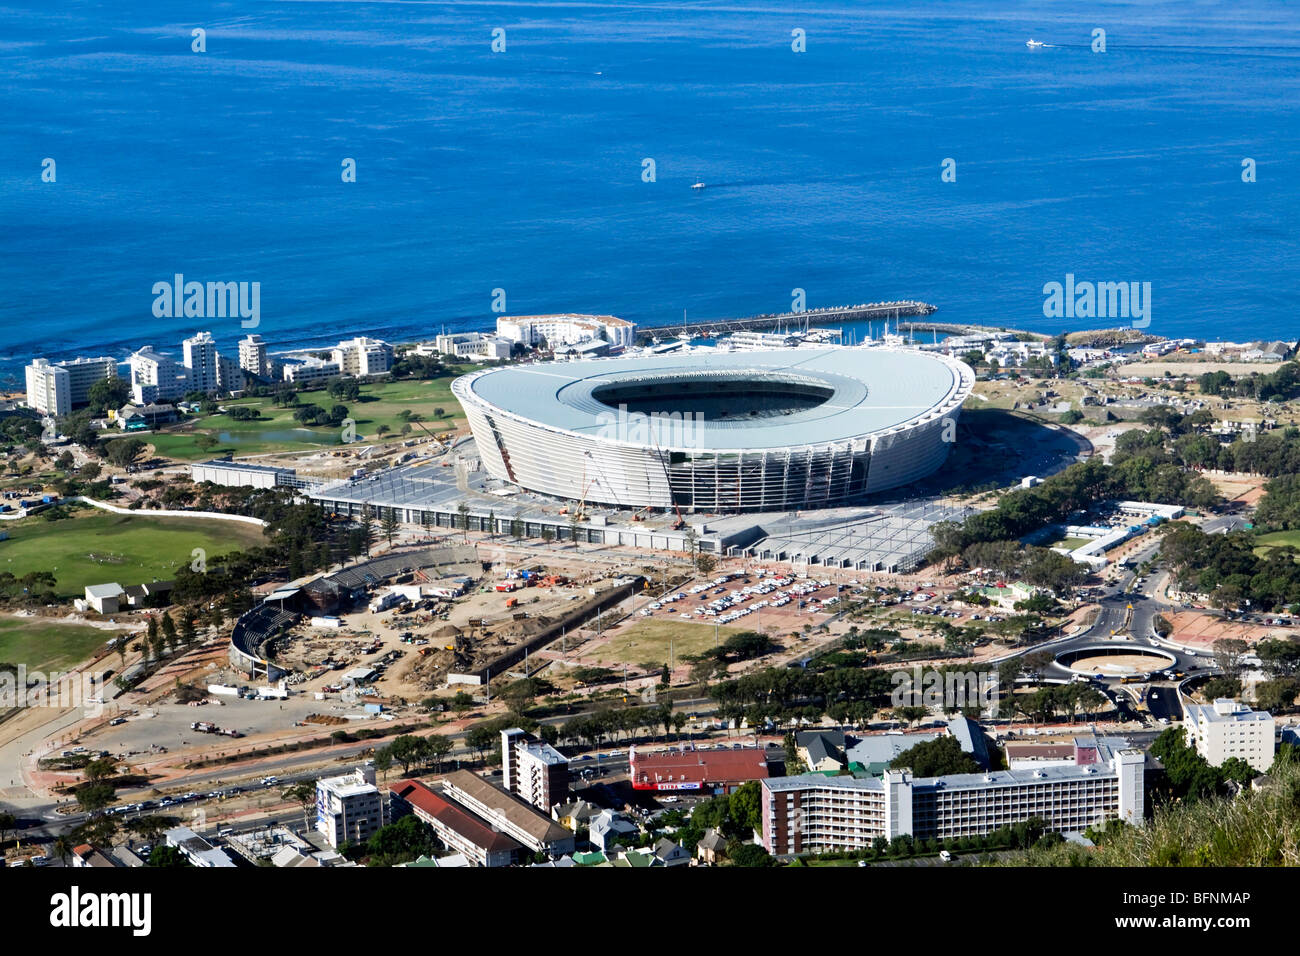 The soccer stadium in Green Point, Cape Town, South Africa, one of the host stadiums for the FIFA Soccer World Cup in 2010 Stock Photo